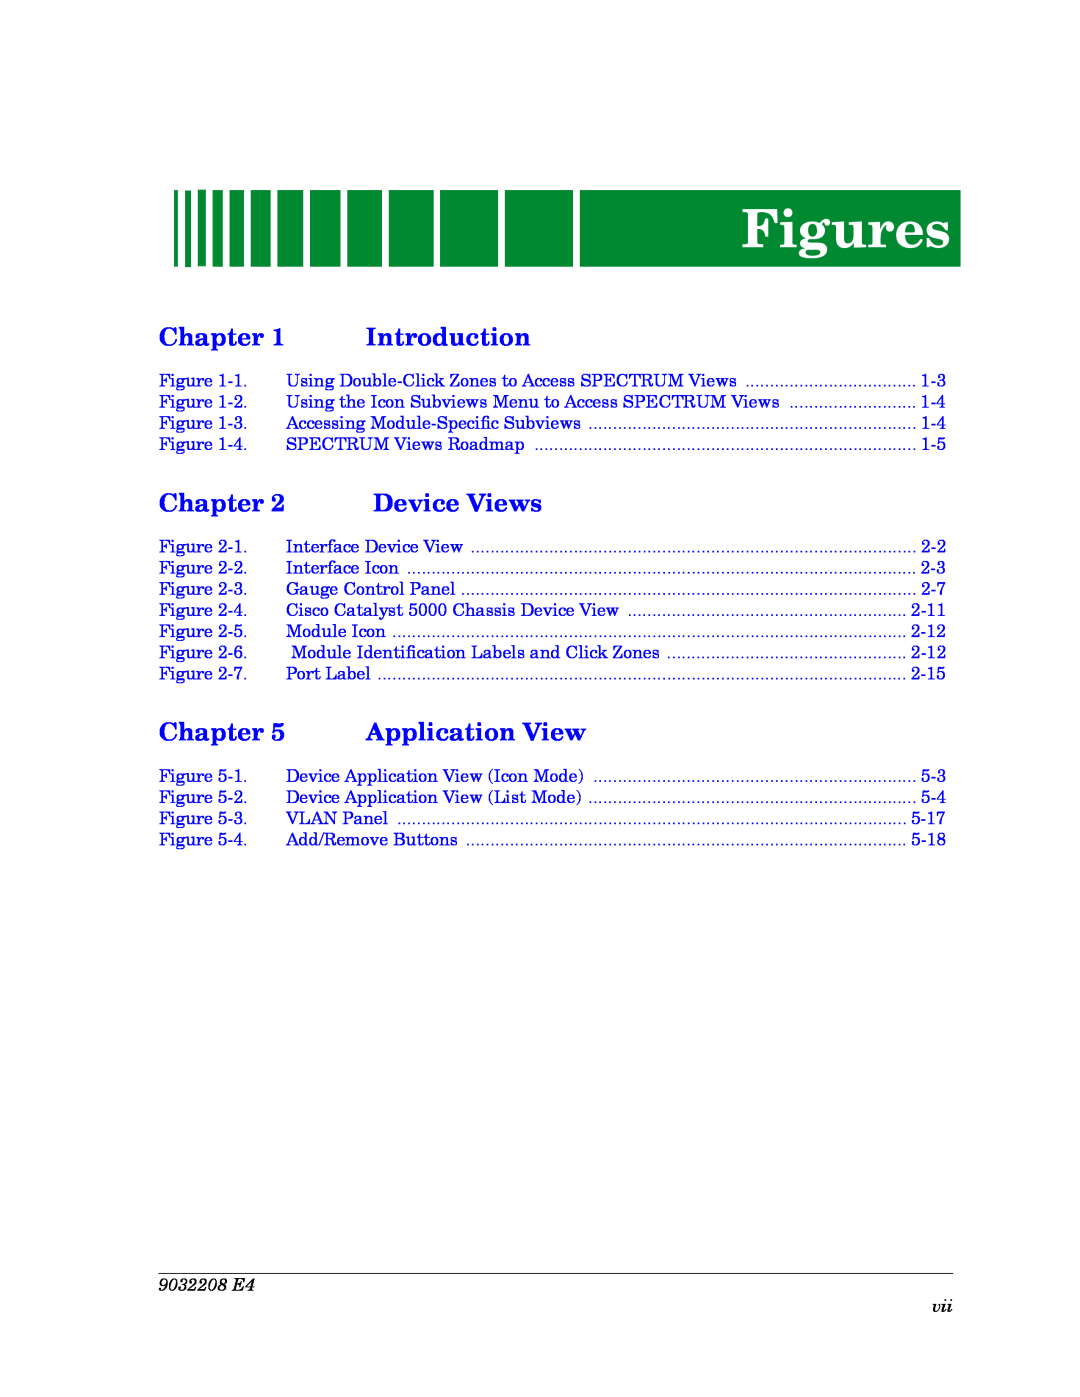 Cabletron Systems 5000, 5500 manual Figures, 9032208 E4 vii, Chapter, Introduction, Device Views, Application View 